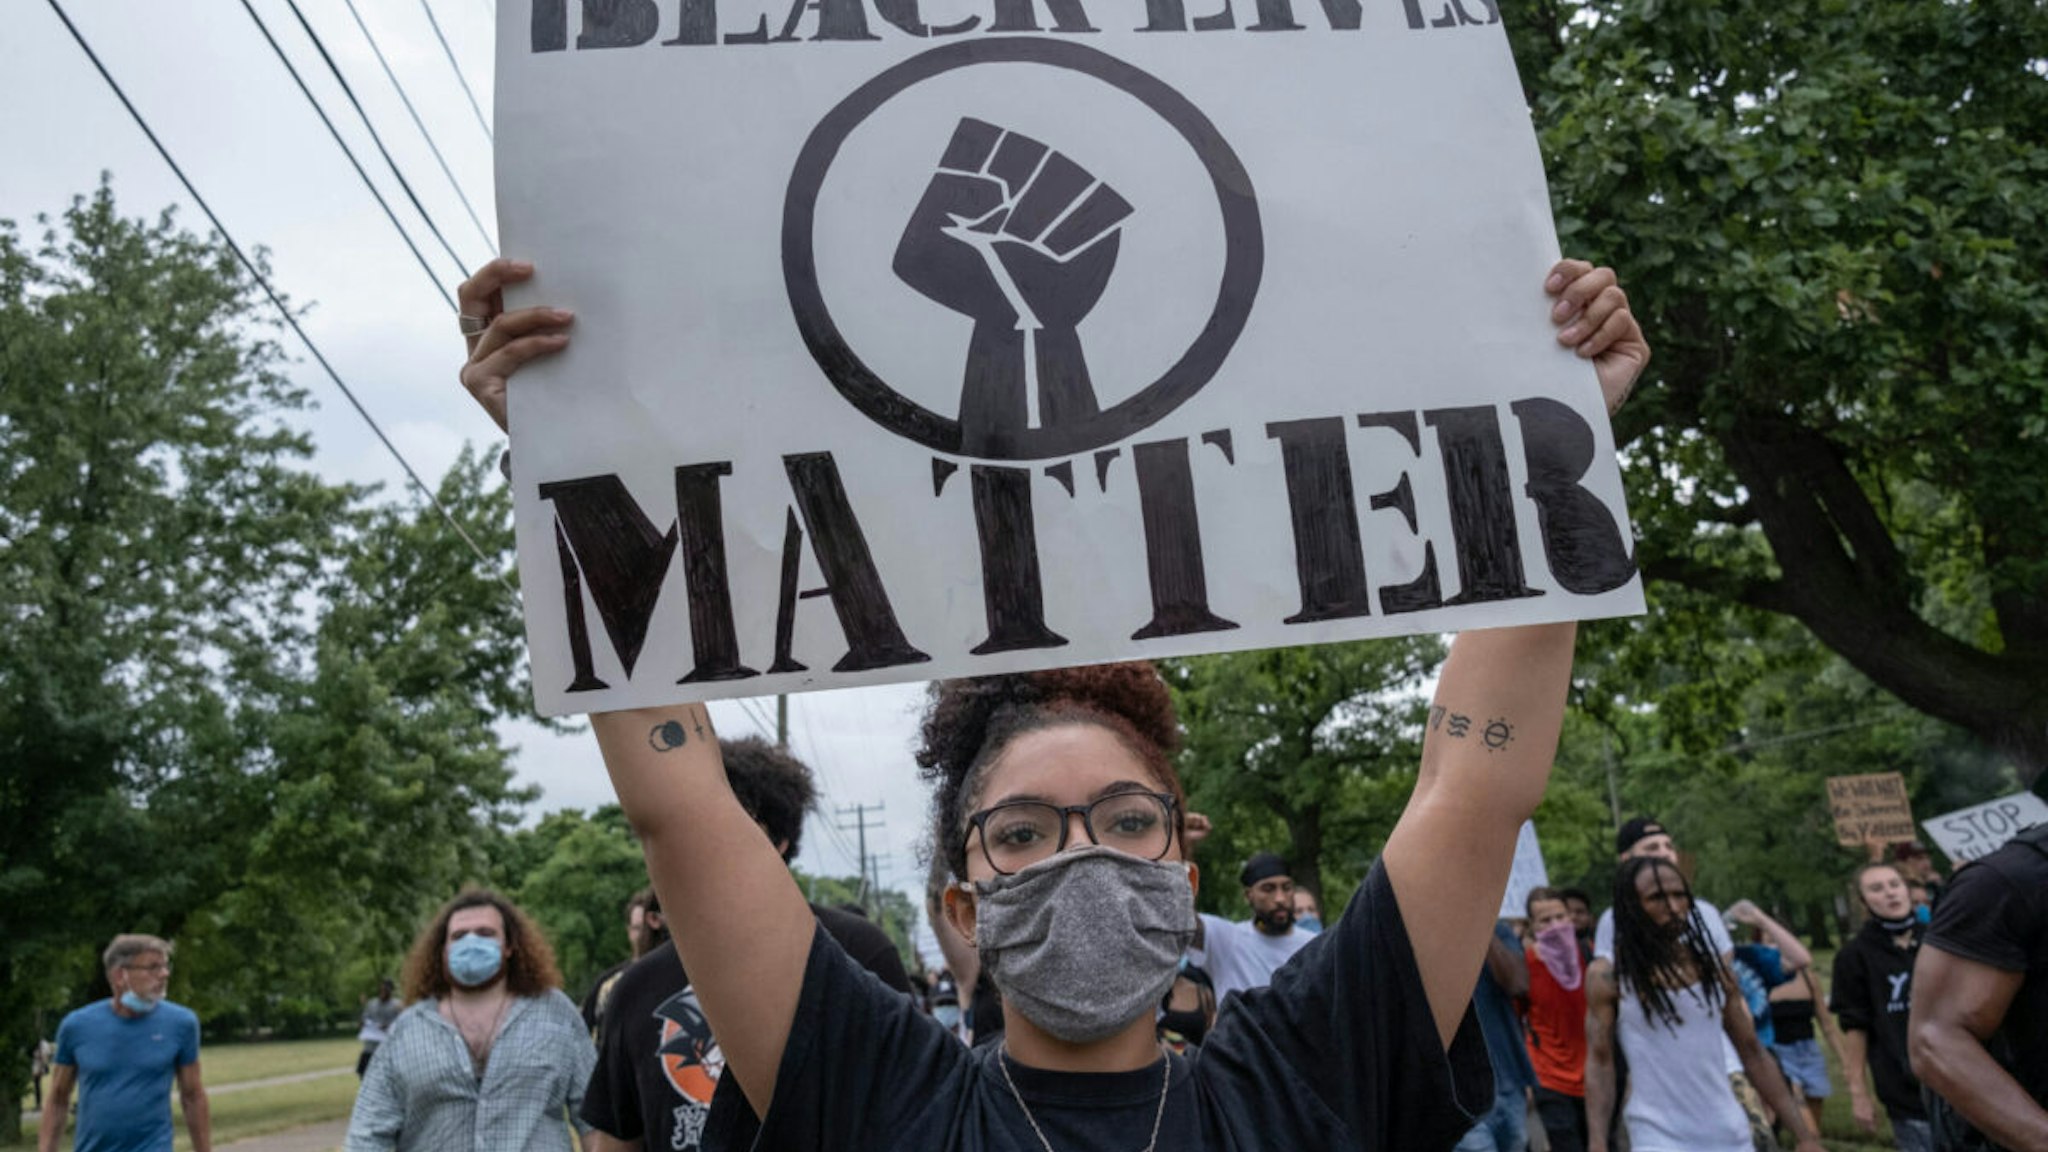 Non-Violent protesters march against police brutality near Detroit's west side, where 20-year-old Hakeem Littleton was shot and killed by Detroit Police earlier in the day, July 10,2020. Video footage released by Police Chief James Craig, within hours of the shooting appeared to show Littleton firing a gun at an officer from close range before being shot. Anti-Police brutality protesters have been marching in Detroit nearly everyday since the May 25, 2020 death of George Floyd at the hands of a white Minneapolis police officer.